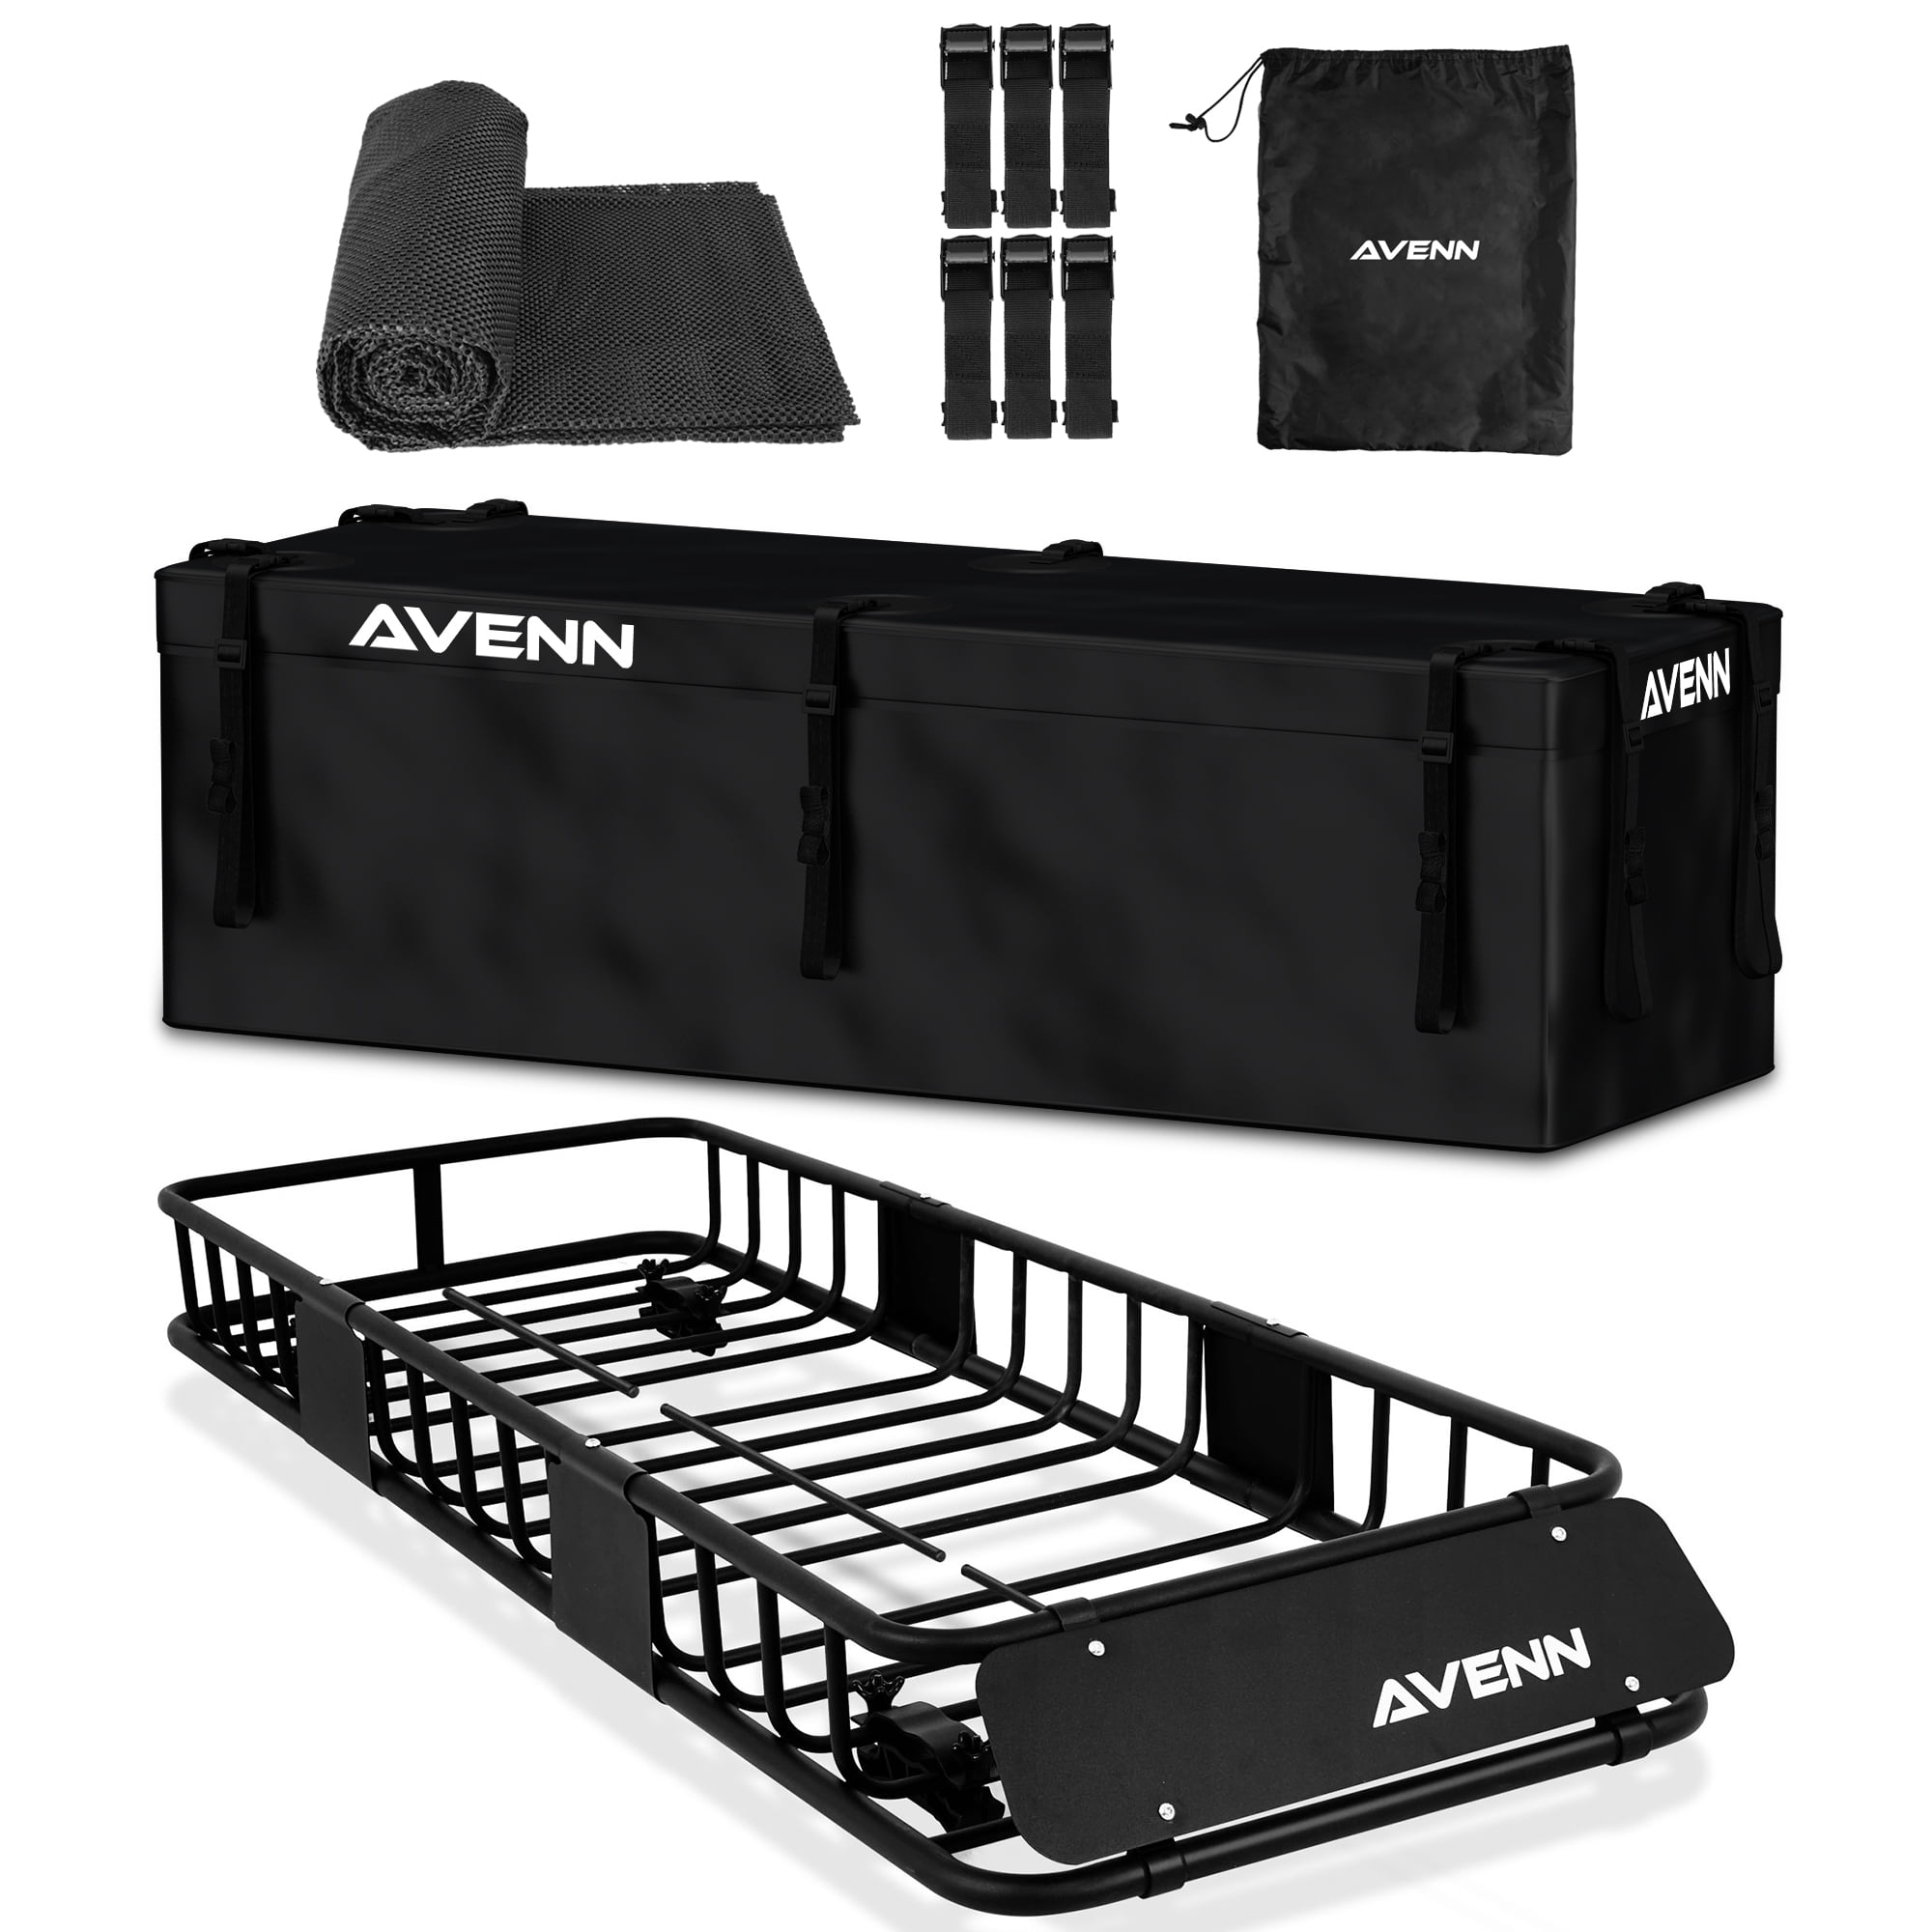 AVENN 64 x 23 x 6 Skinny Roof Rack Cargo Carrier Top Luggage Holder Basket for SUV Pickup Car Camping 150 Lbs Capacity 